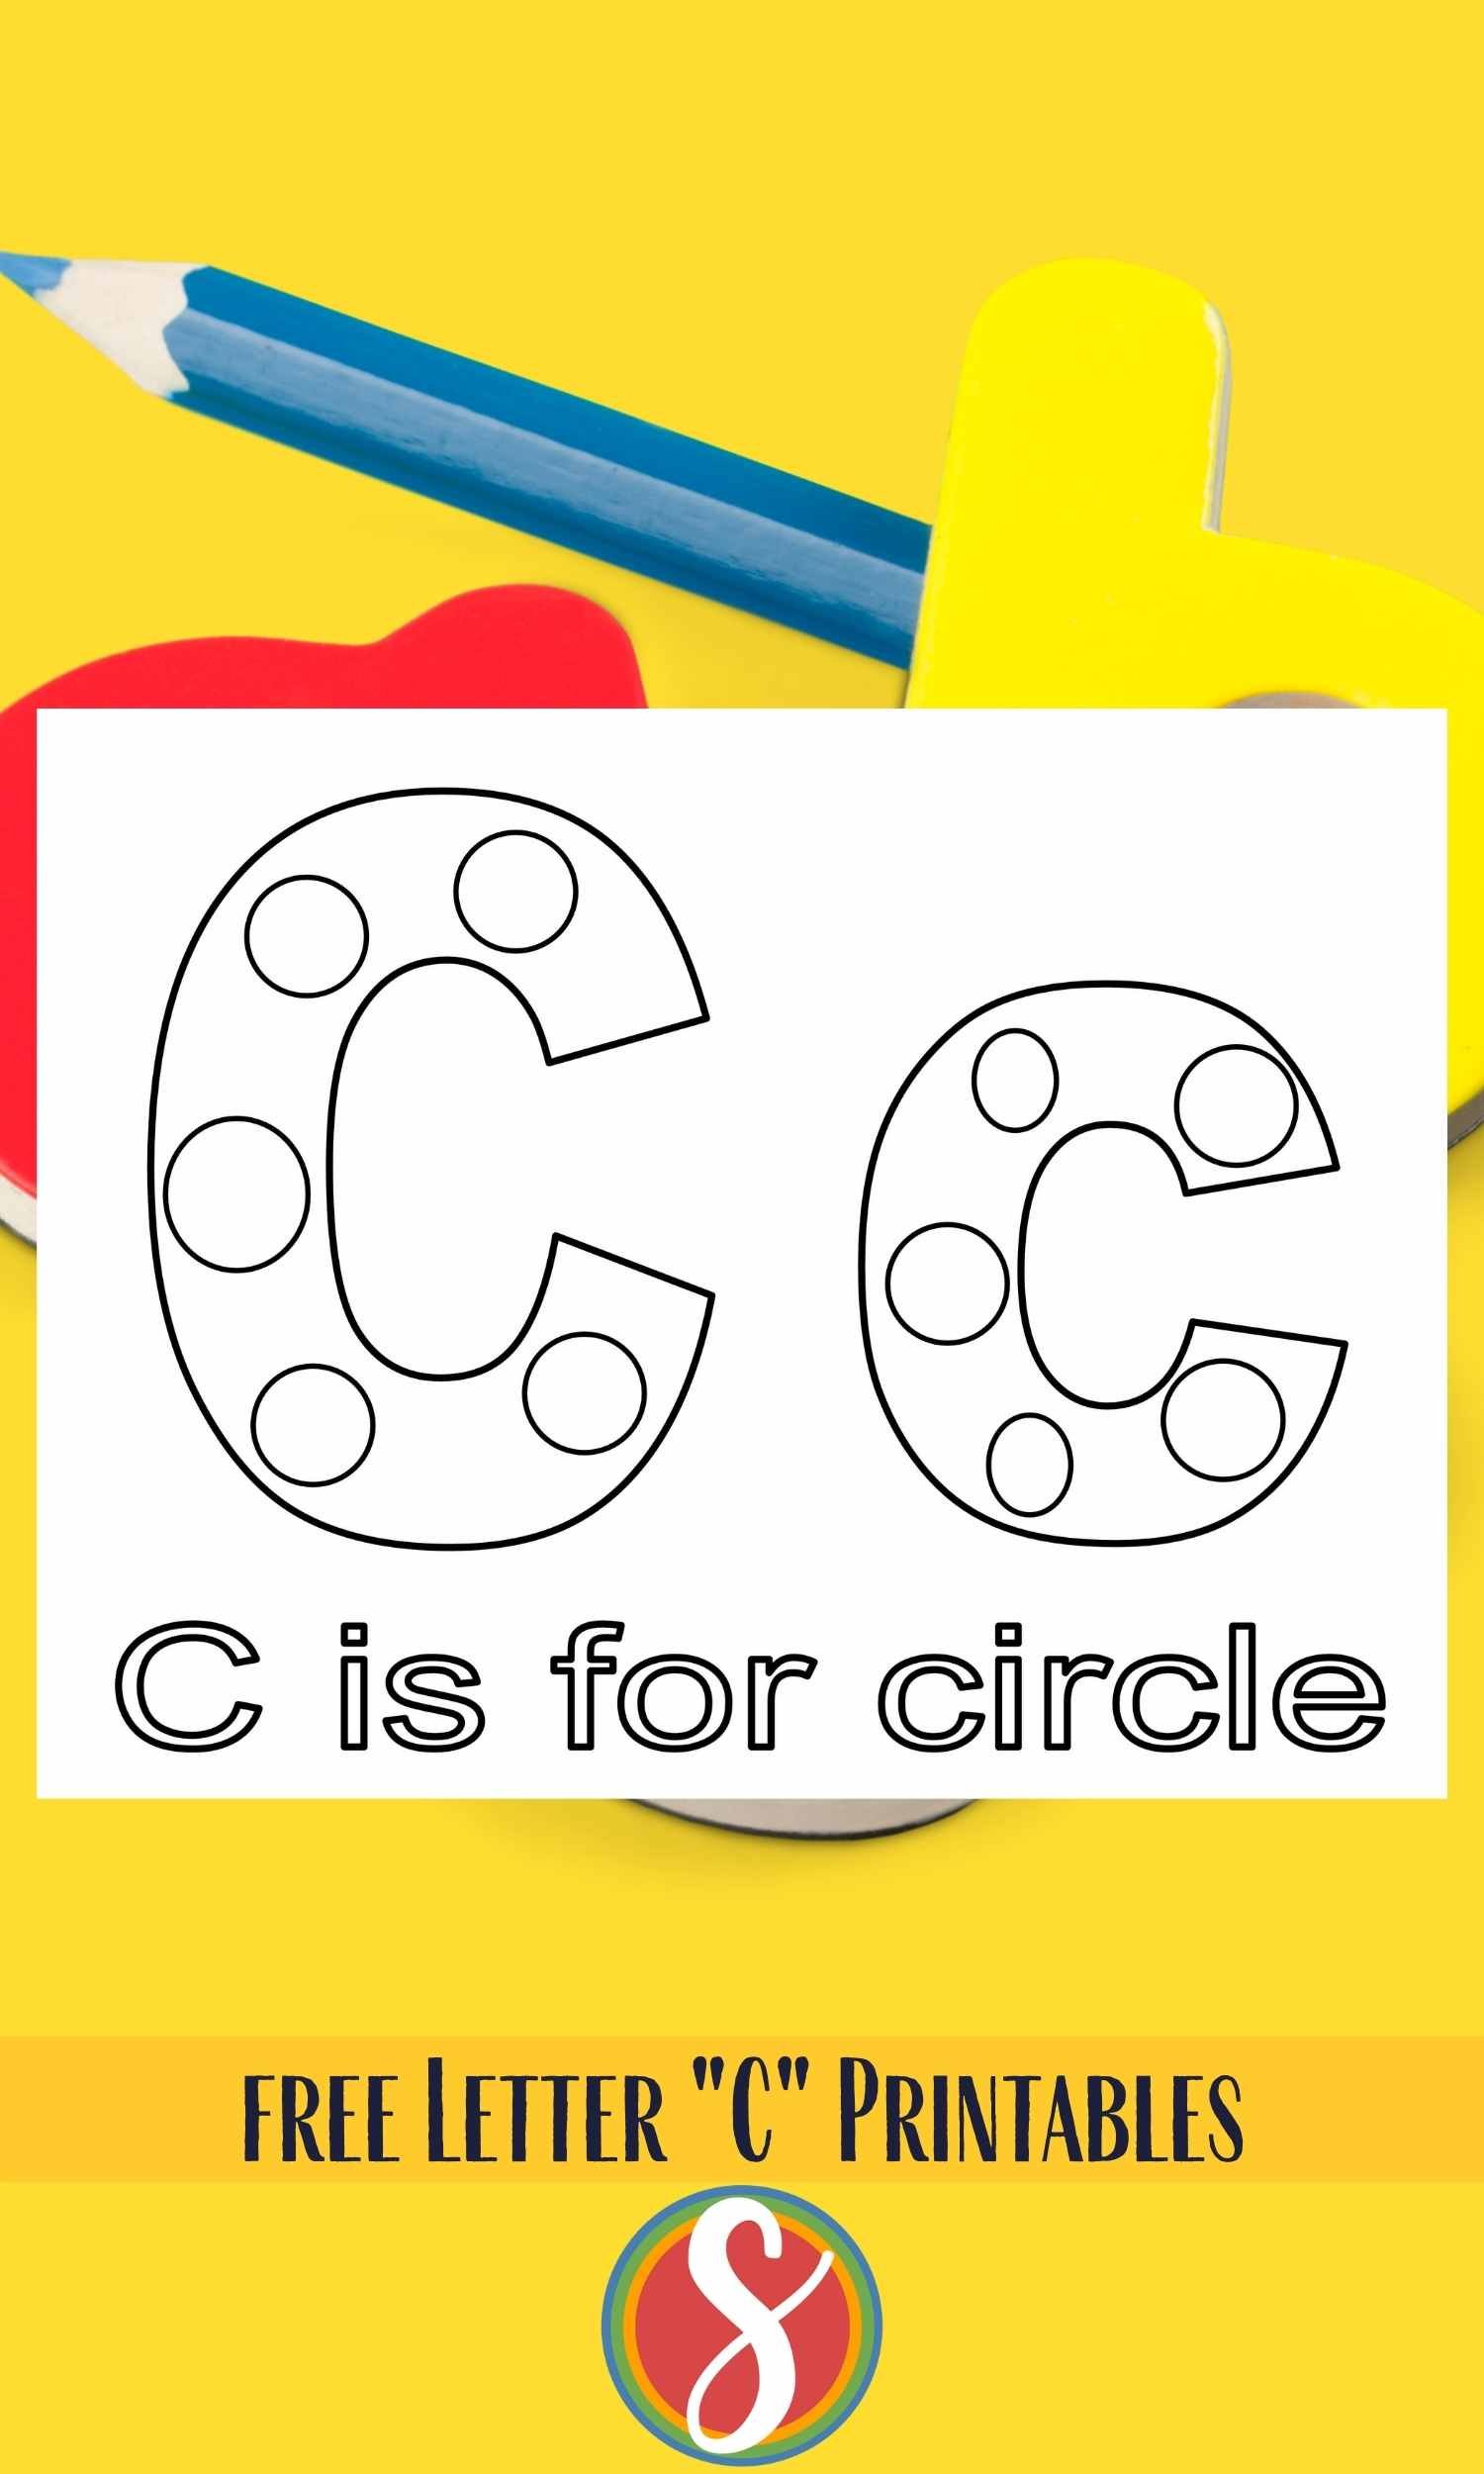 2 bubble letter c's with circles inside and text "c is for circles"